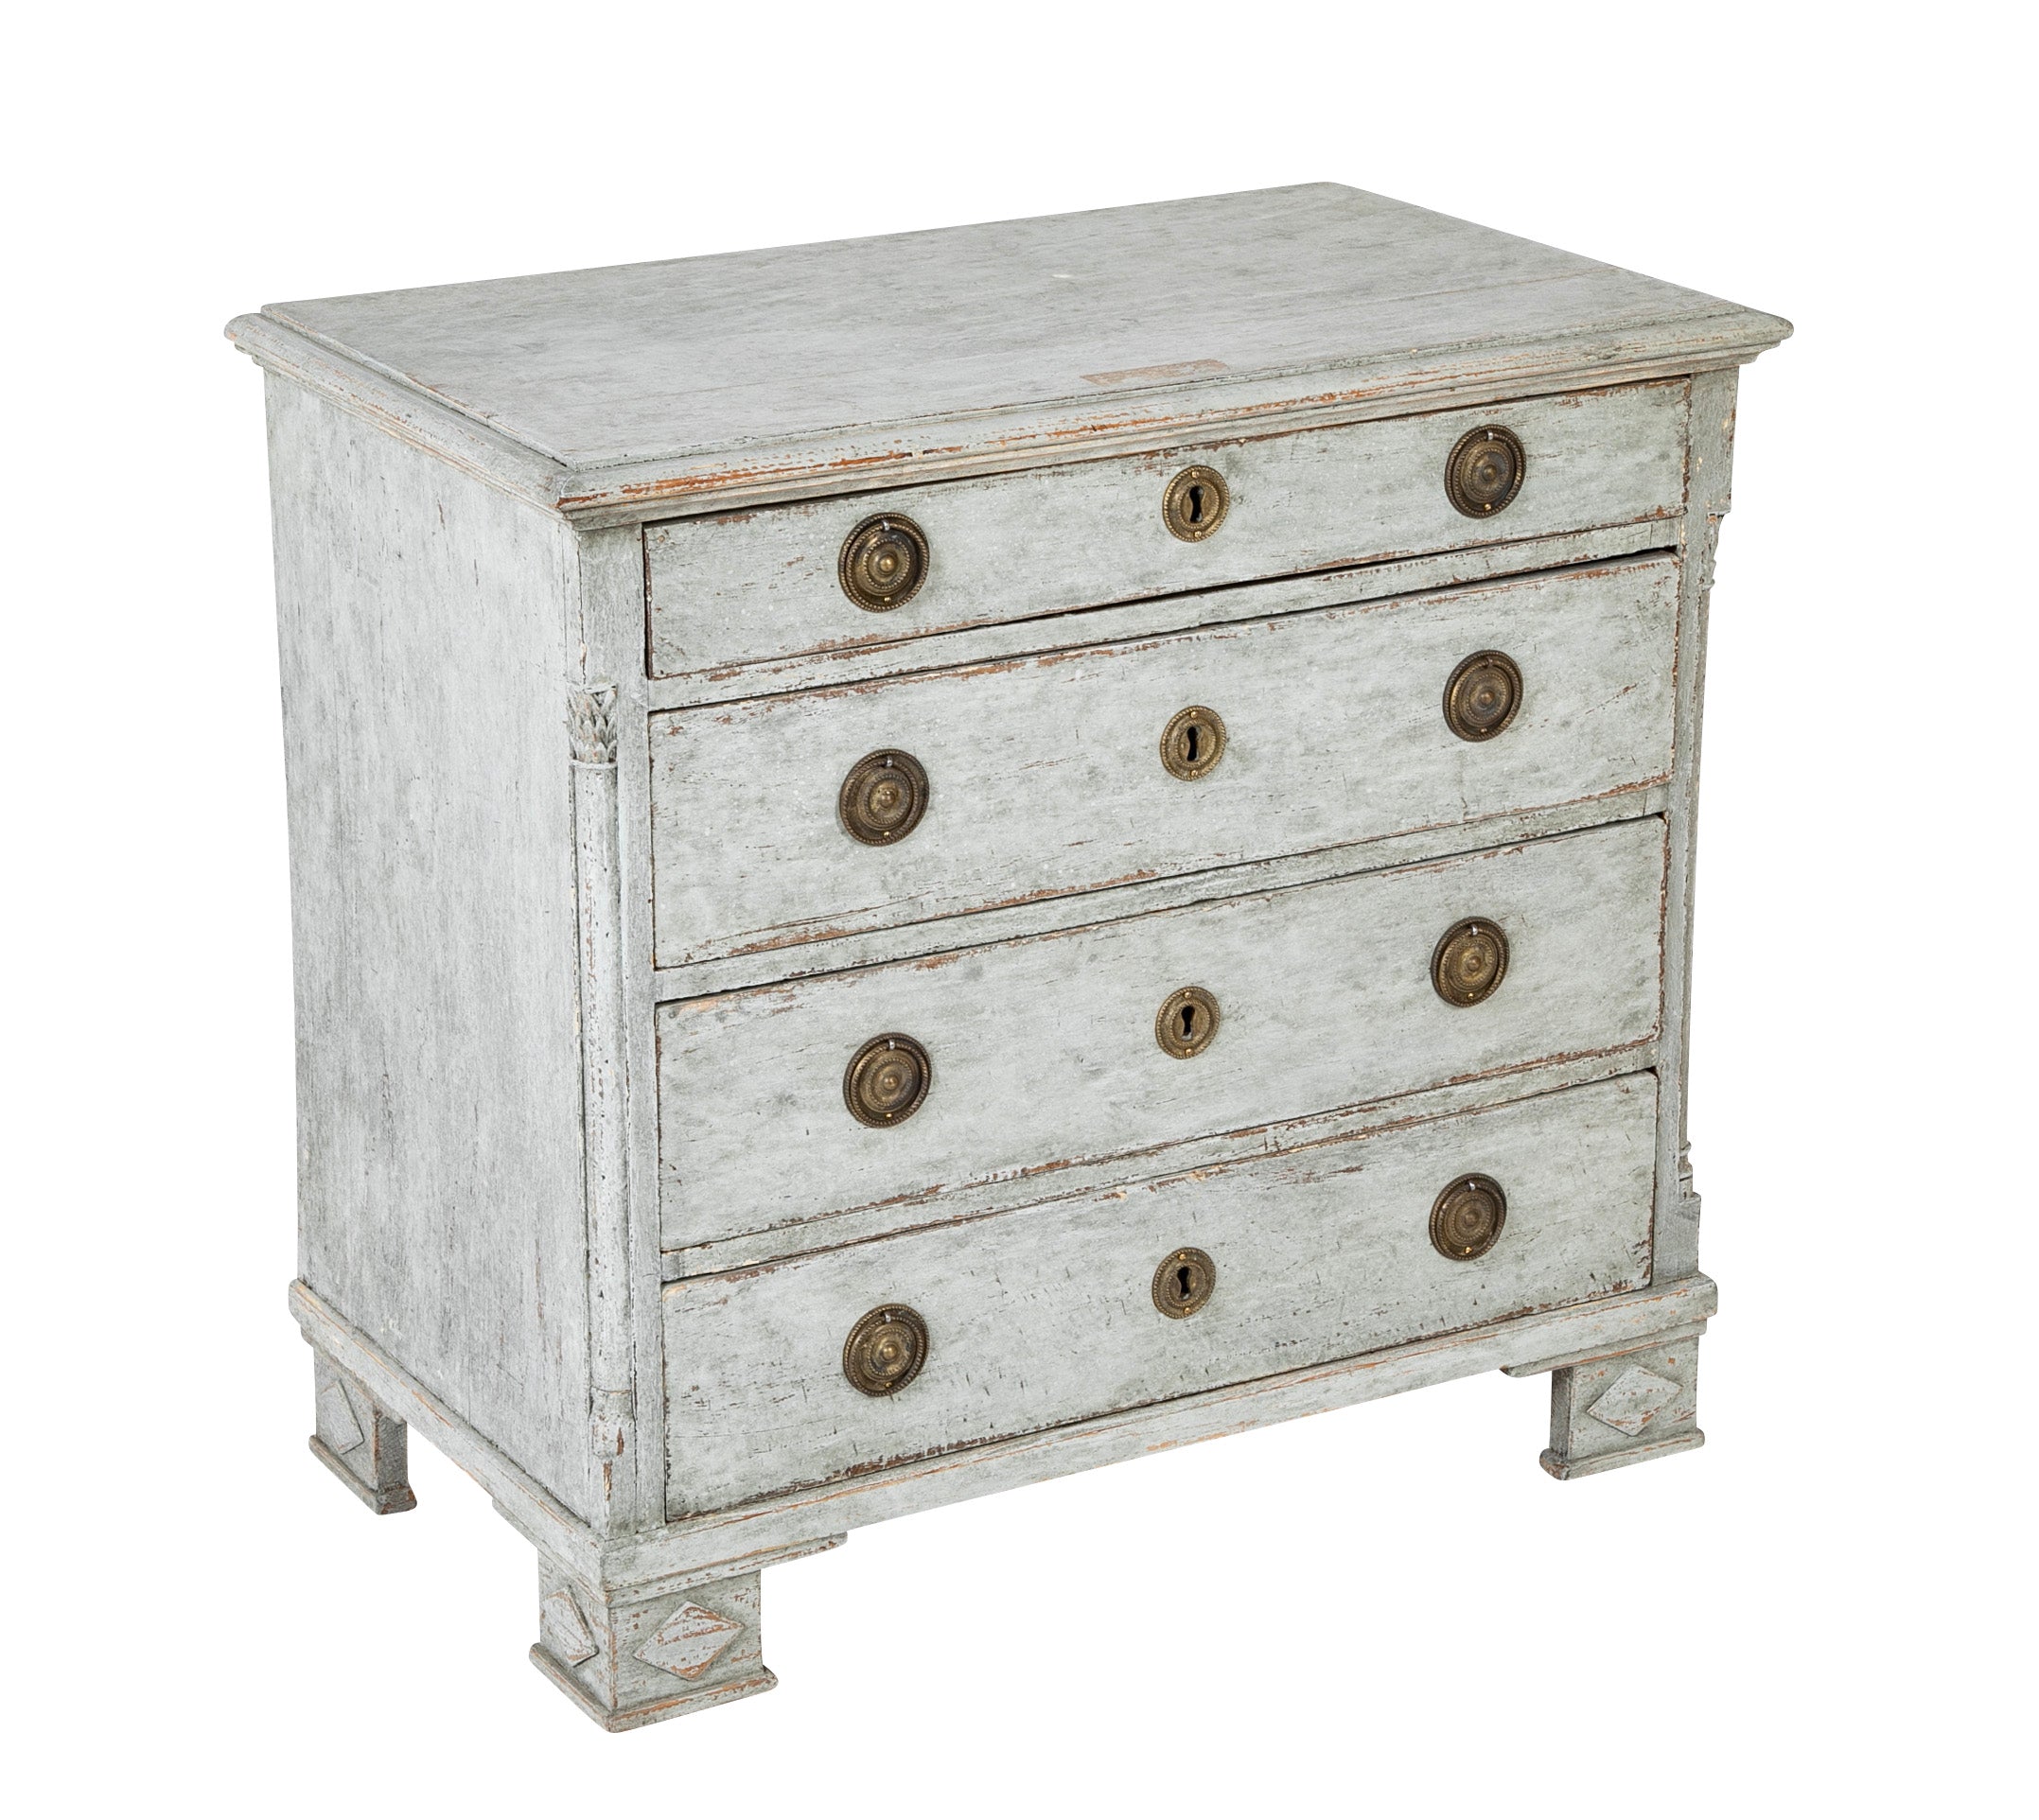 A Louis XVI White Painted Four Drawer Chest